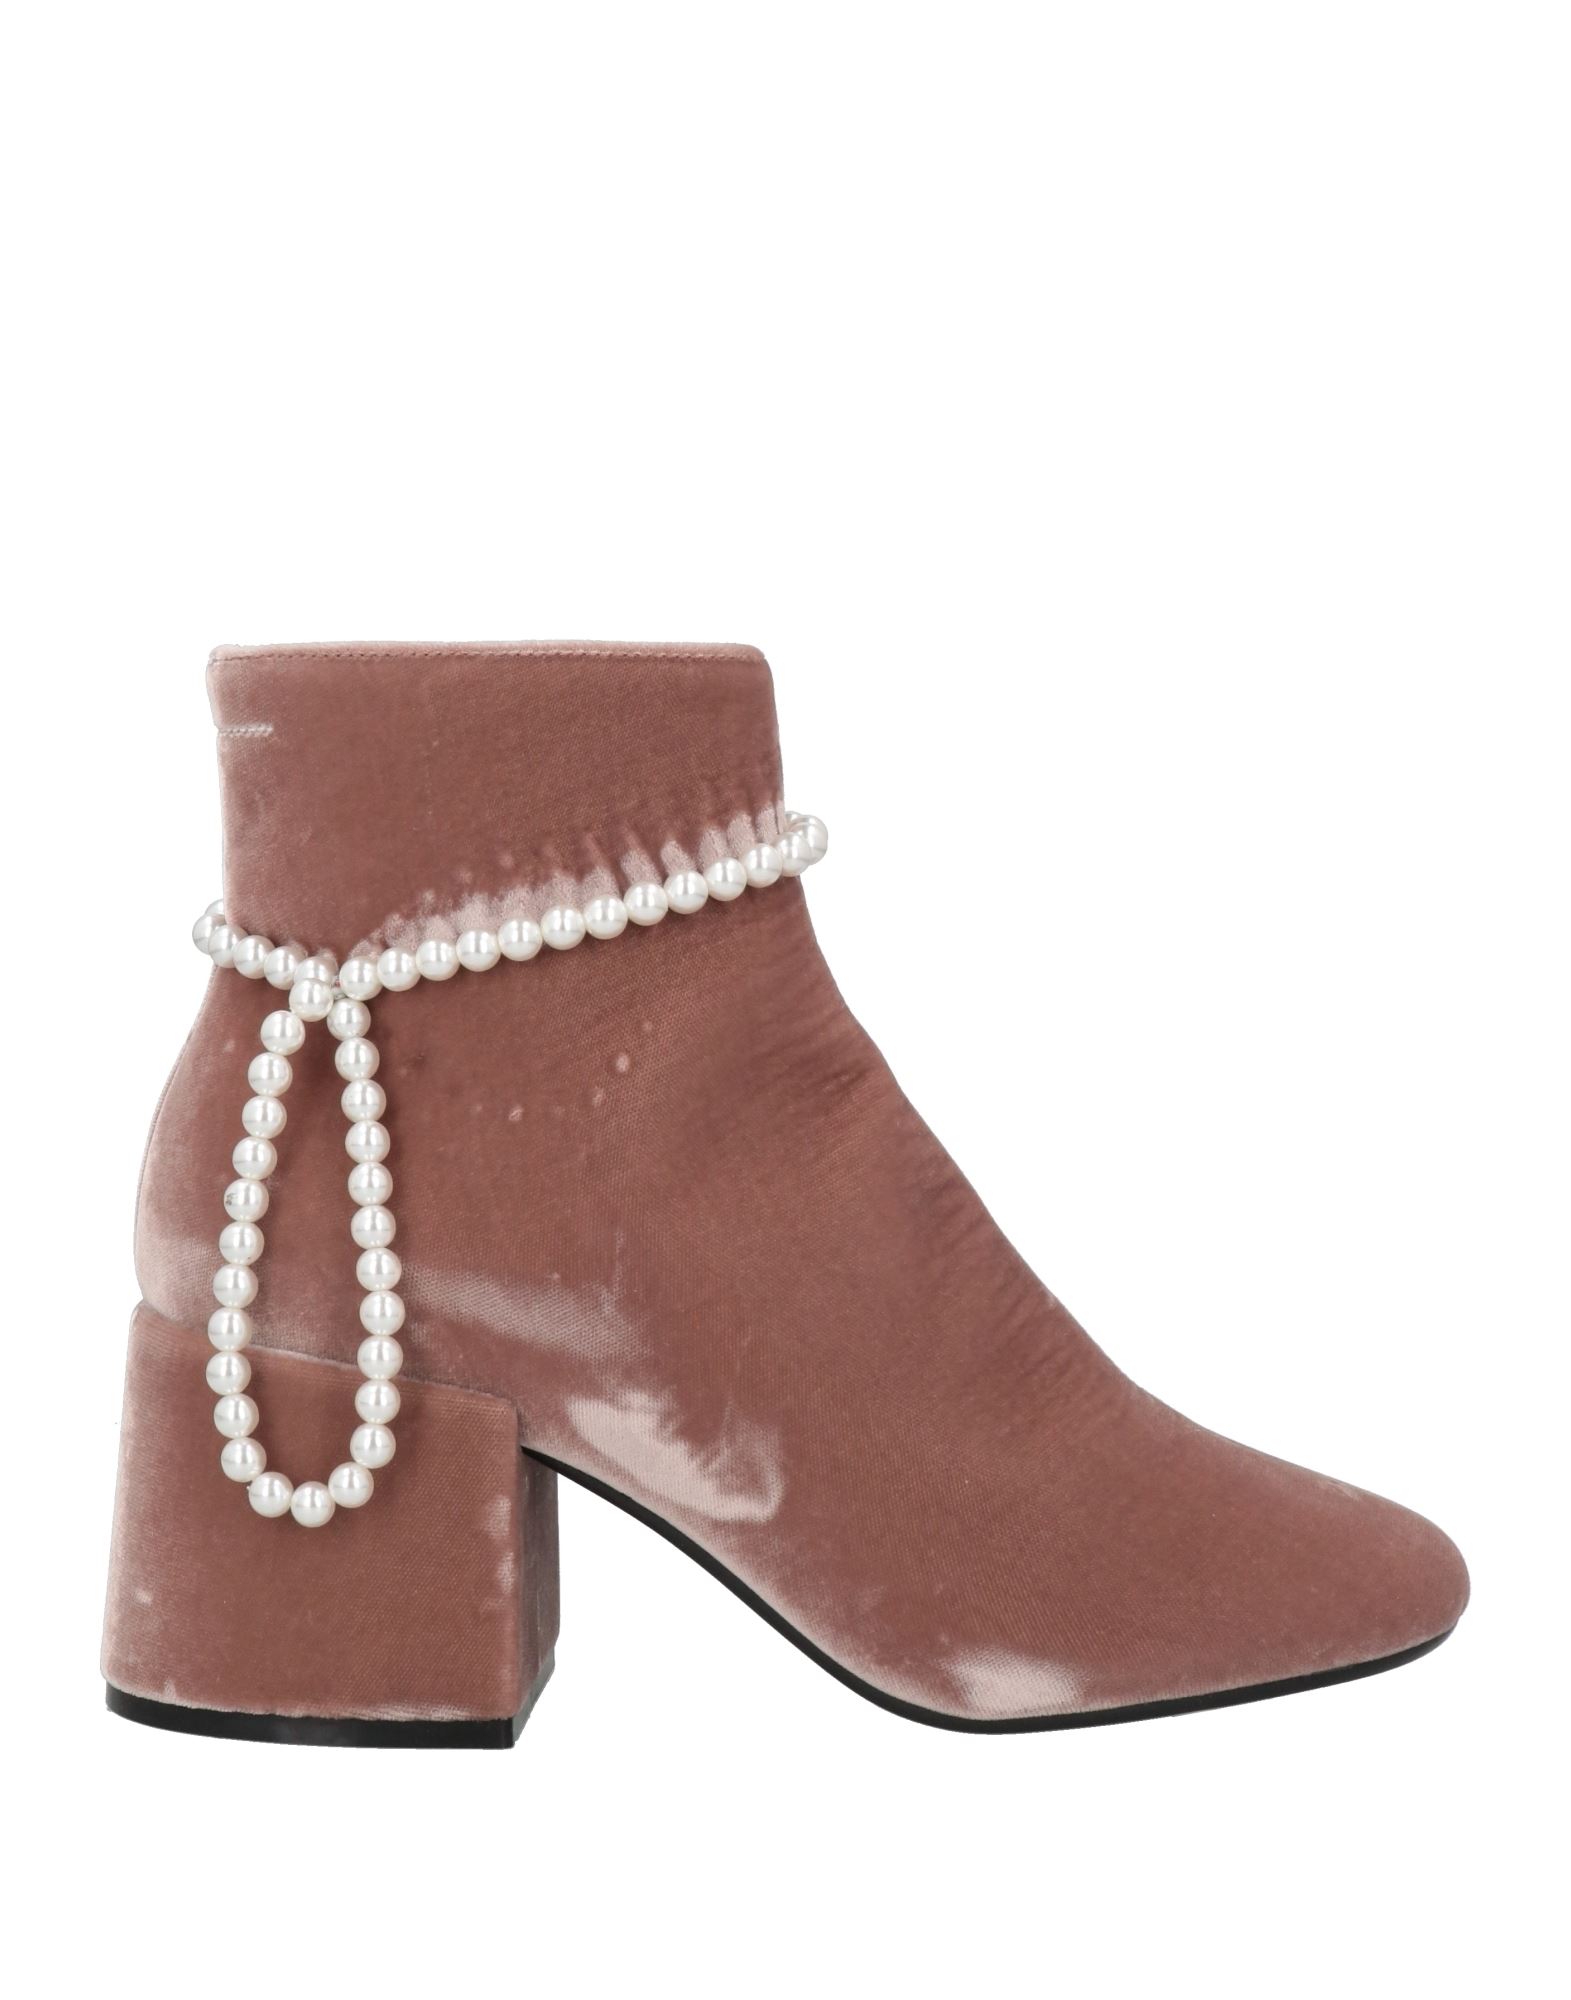 Mm6 Maison Margiela Ankle Boots In Pink